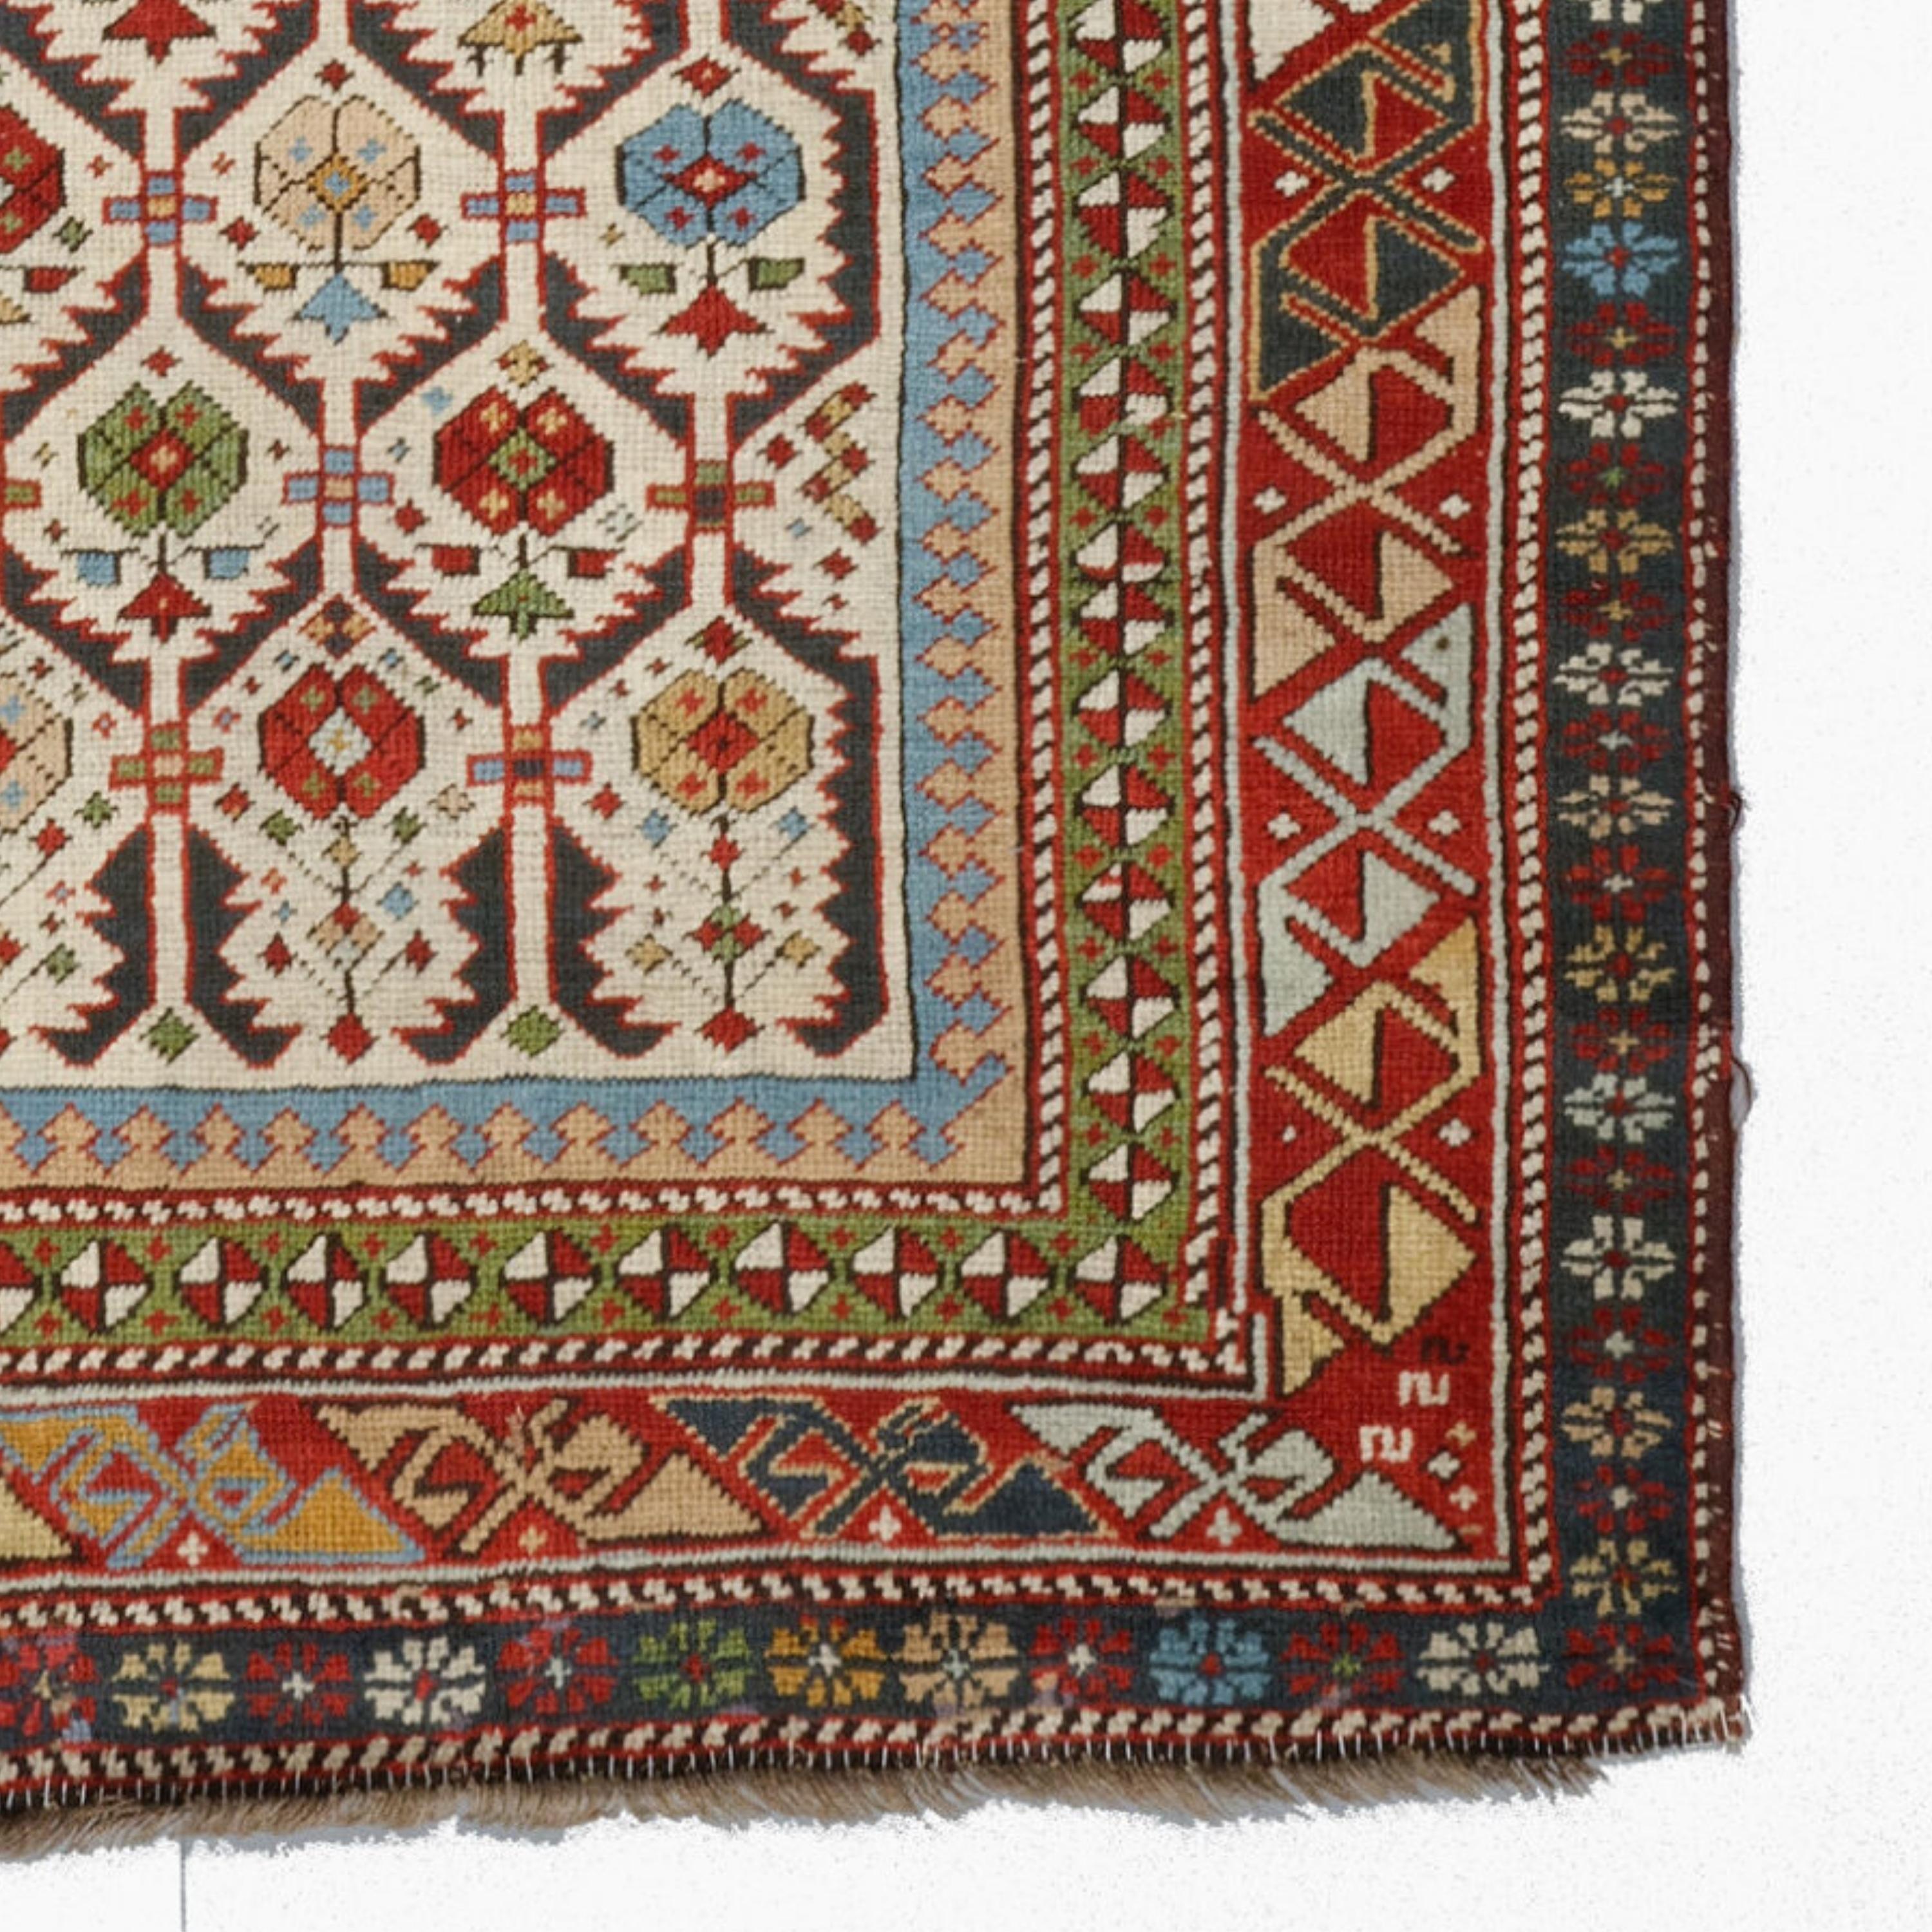 Wool Antique Shirvan Prayer Rug - Late Of The 19th Century Prayer Shirvan Rug For Sale